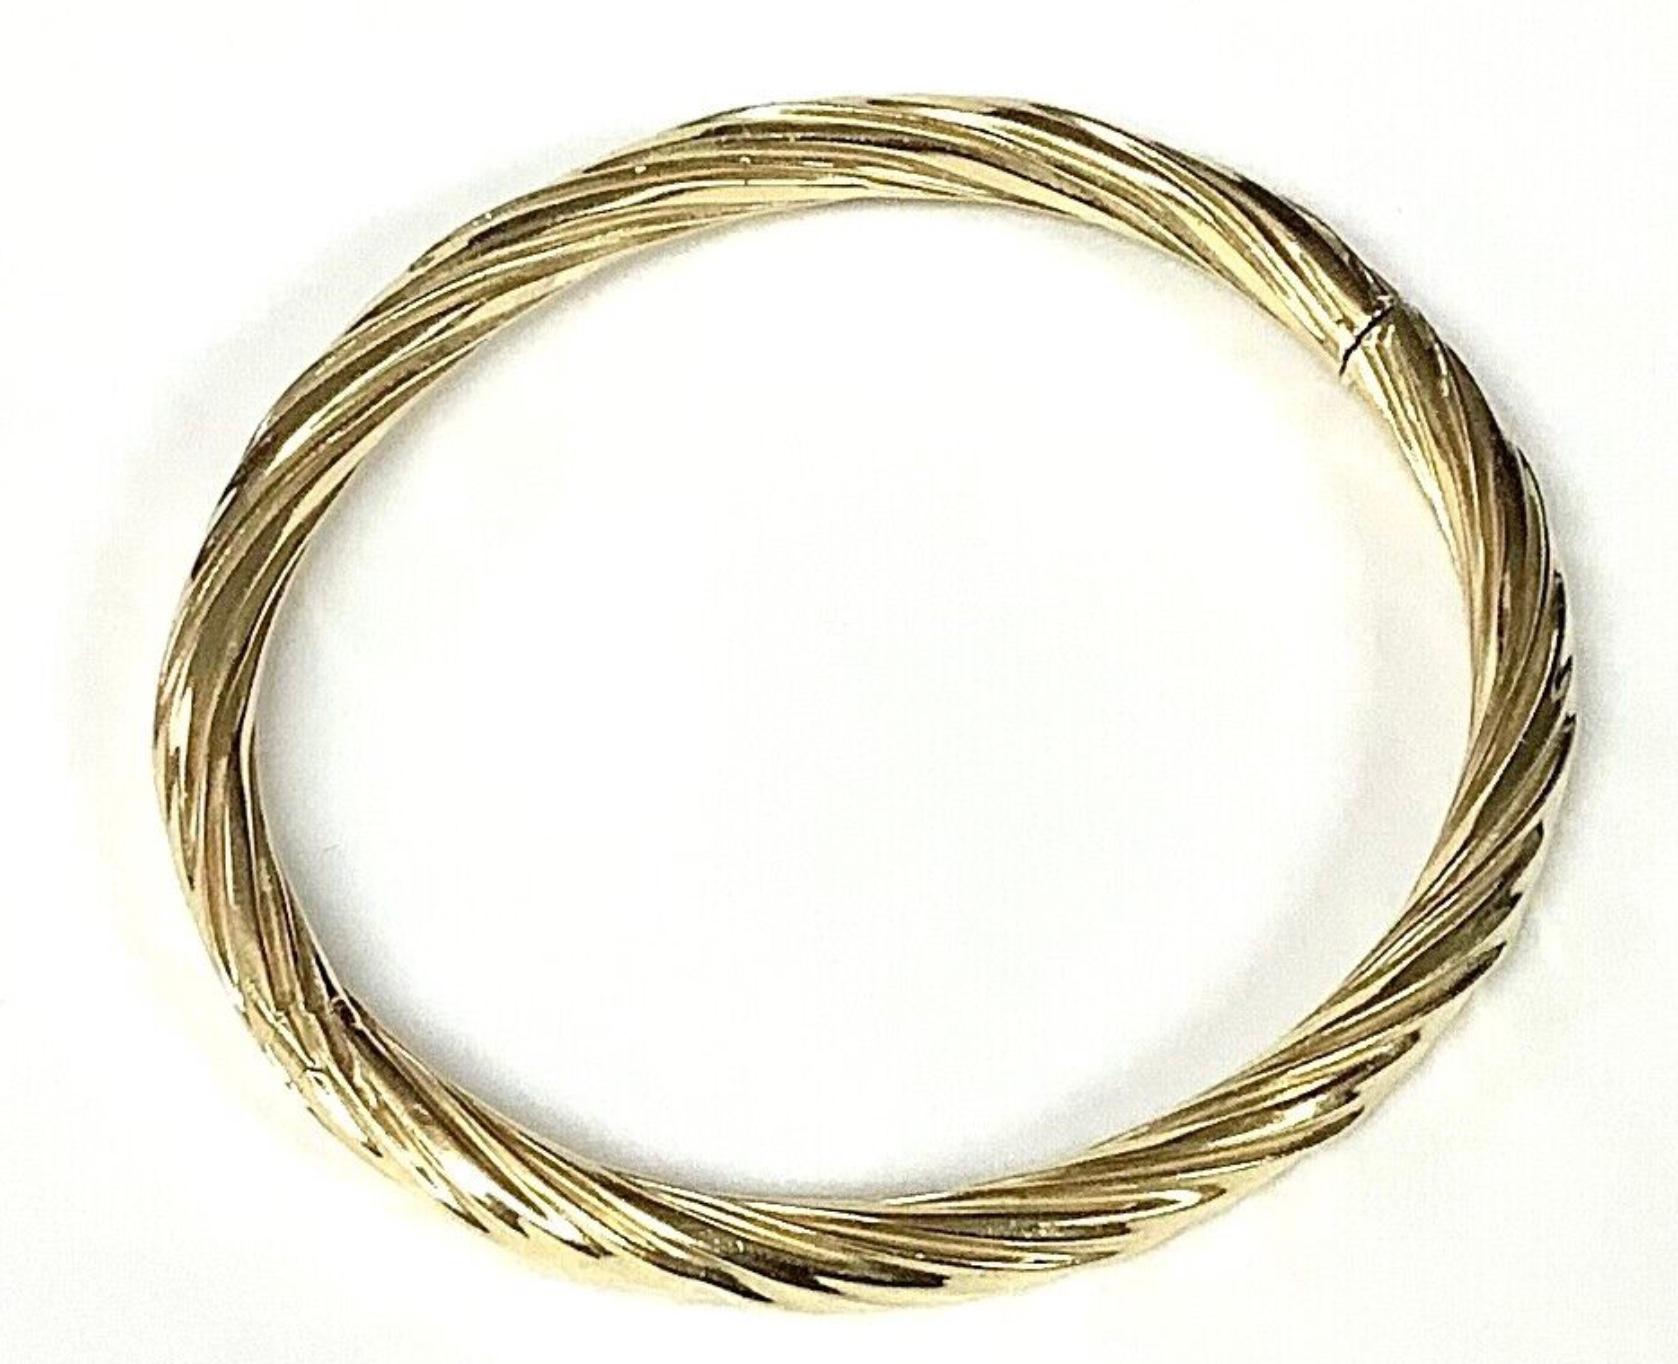 14k yellow gold women's twist bangle bracelet. This timeless bangle bracelet is made of 14 karat yellow gold. It has a wonderful warm glow. The bracelet has a nice height of 5 millimeters, is oval shaped and hinged. This lovely bangle is versatile